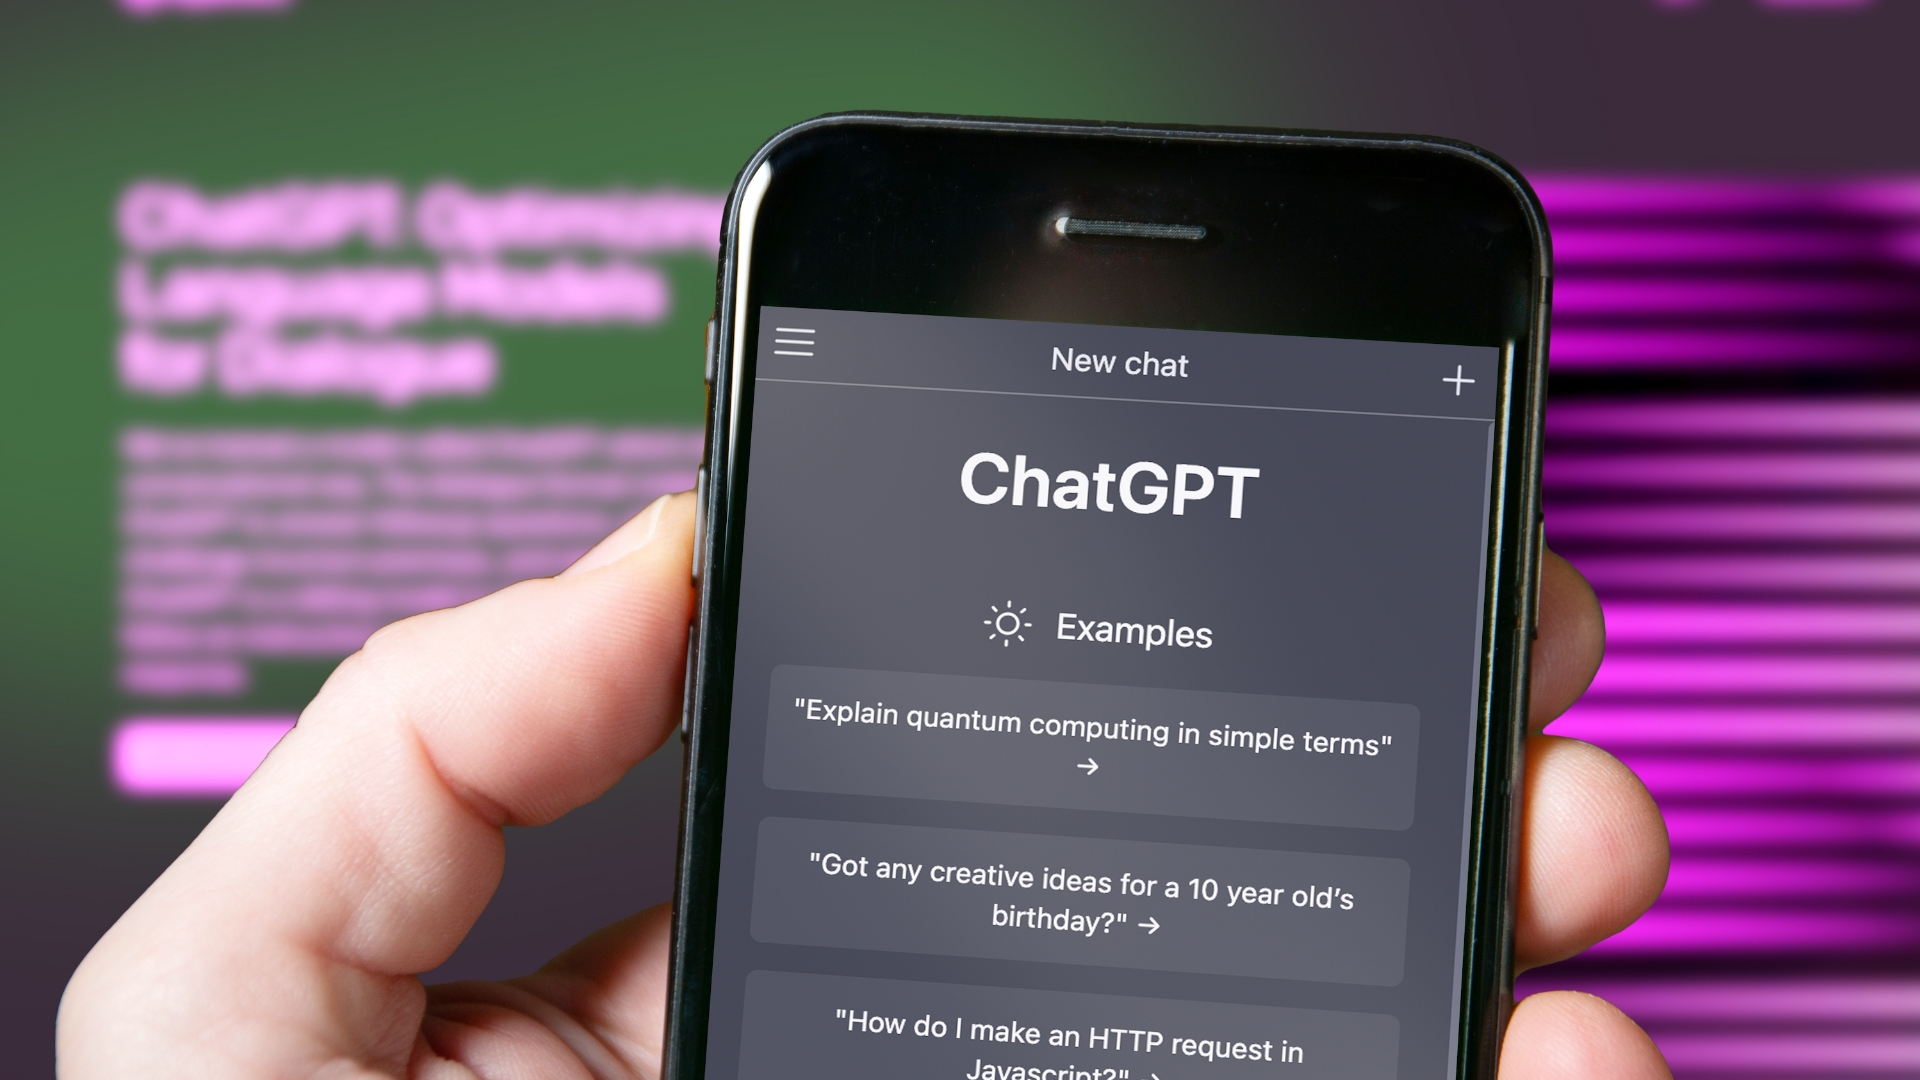 With the addition of prompt examples and suggested responses, ChatGPT has been updated.